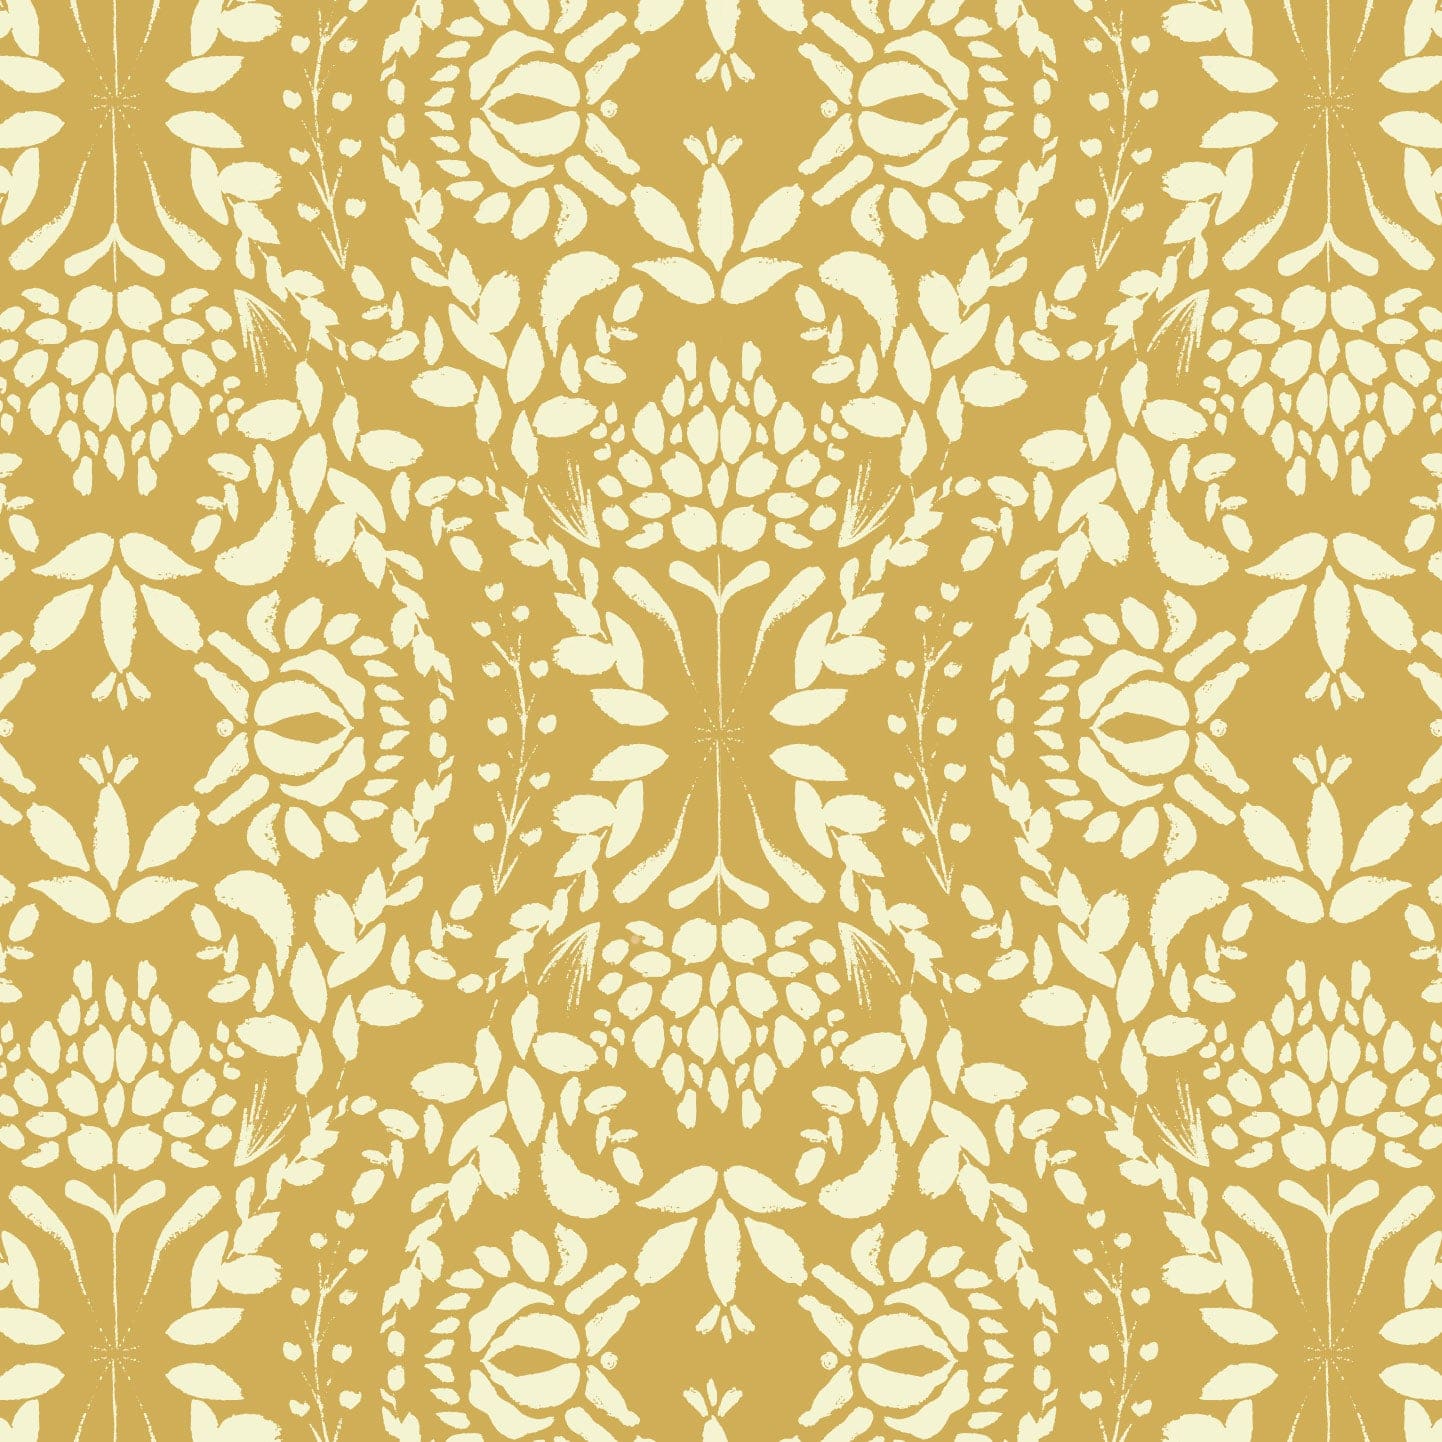 Wallpaper sample of mustard background with cream floral detailing of leaves and petals. 